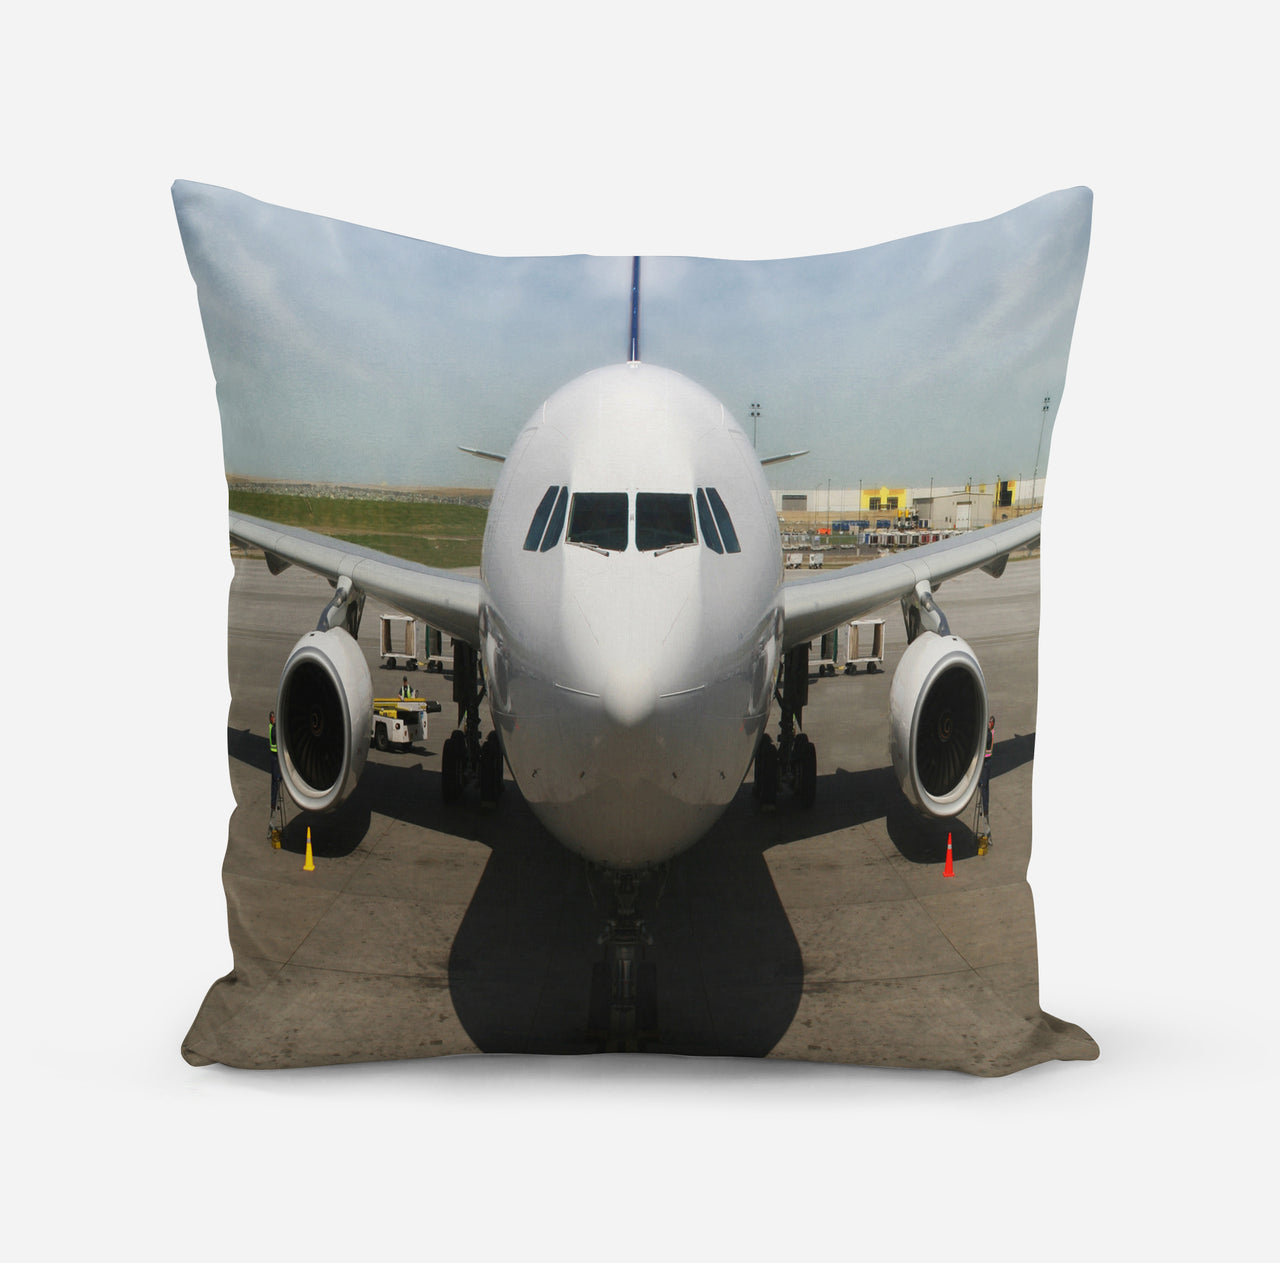 Face to Face with an Huge Airbus Designed Pillows